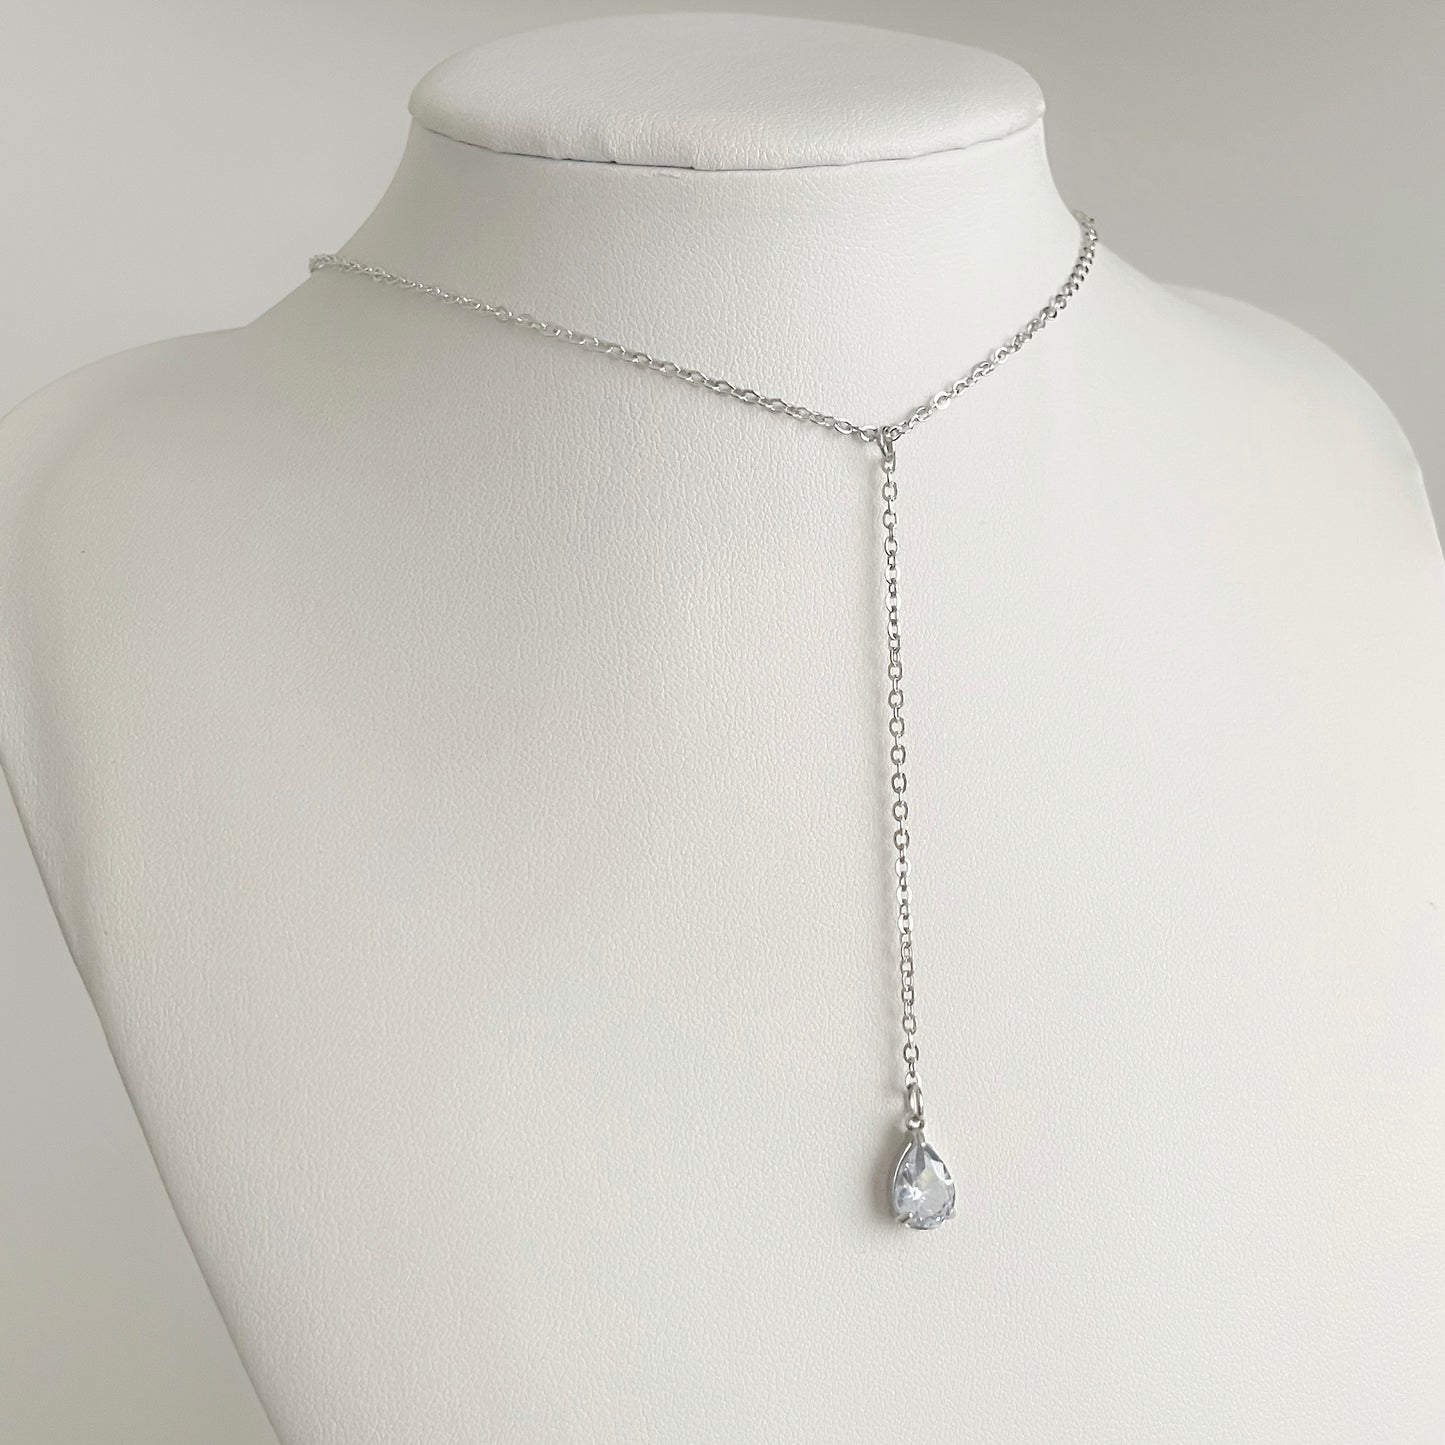 Twinkly Lariat Necklace Silver